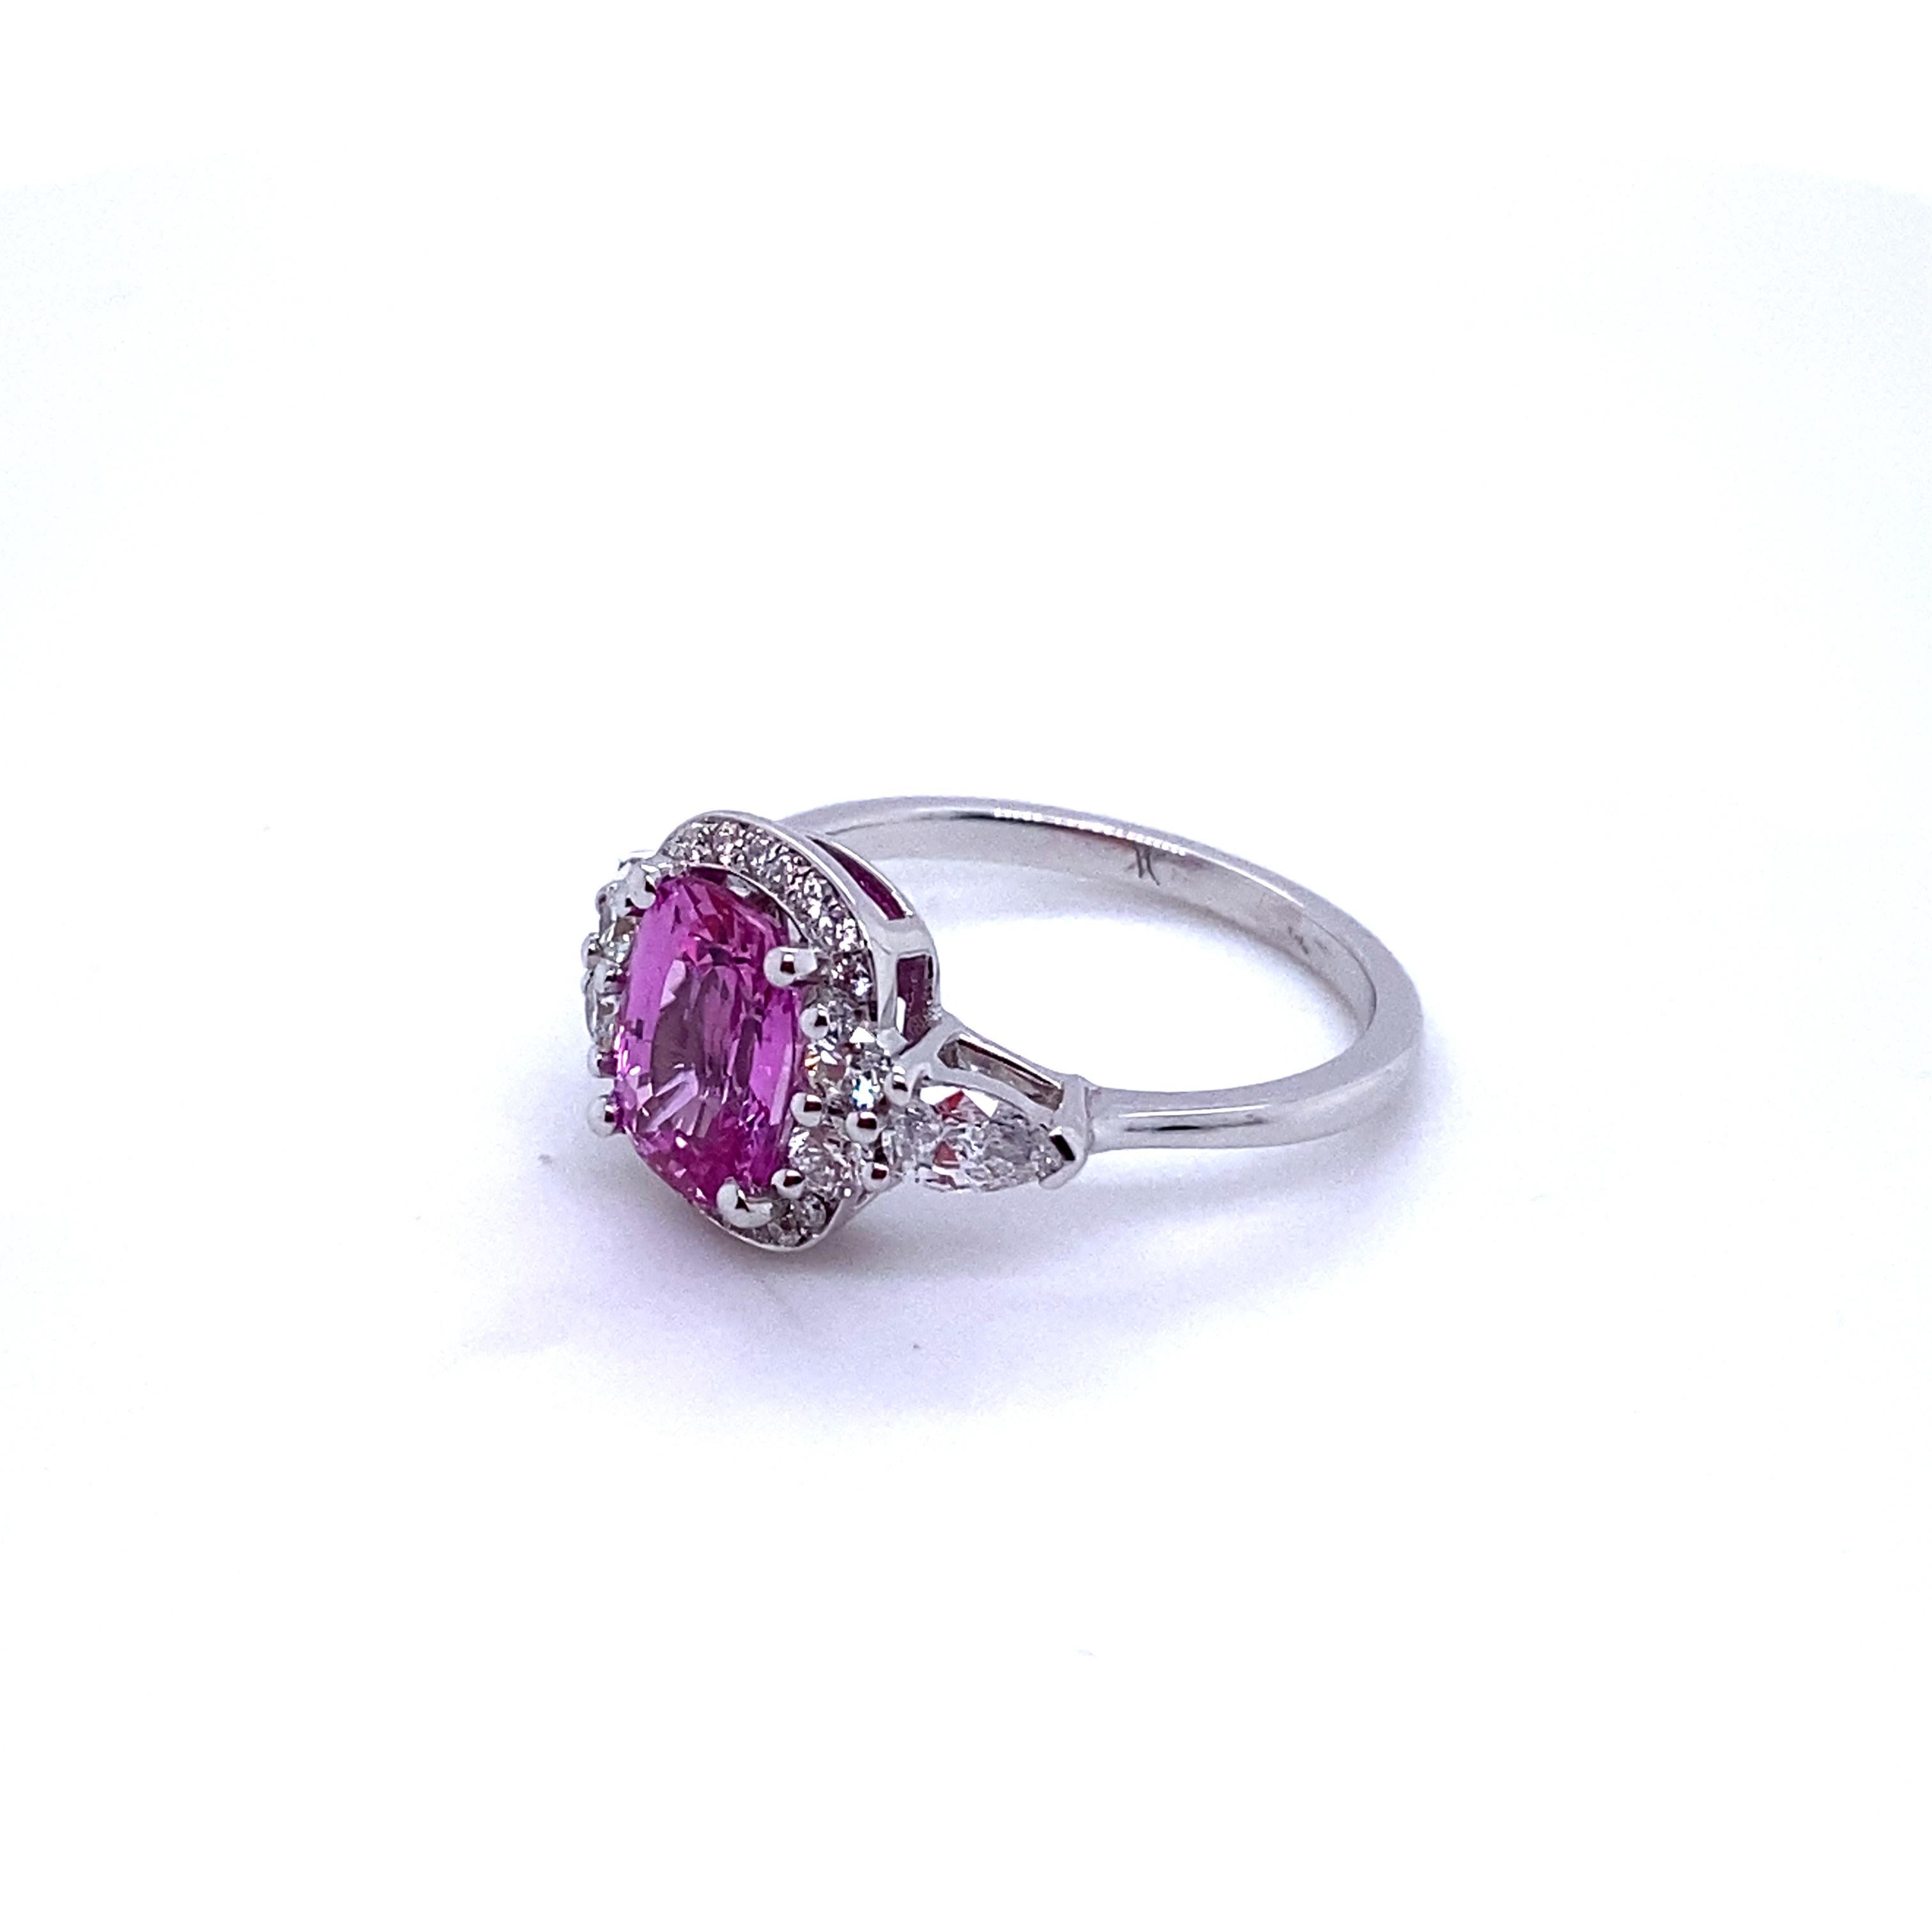 Gold Engagement Ring Surmounted by a Pink Sapphire Surrounded by Diamonds
This magnificent engagement ring can be accompanied by a diamond or all-gold wedding ring. It can also be the gift for the birth of a little girl. The spread of the sapphire